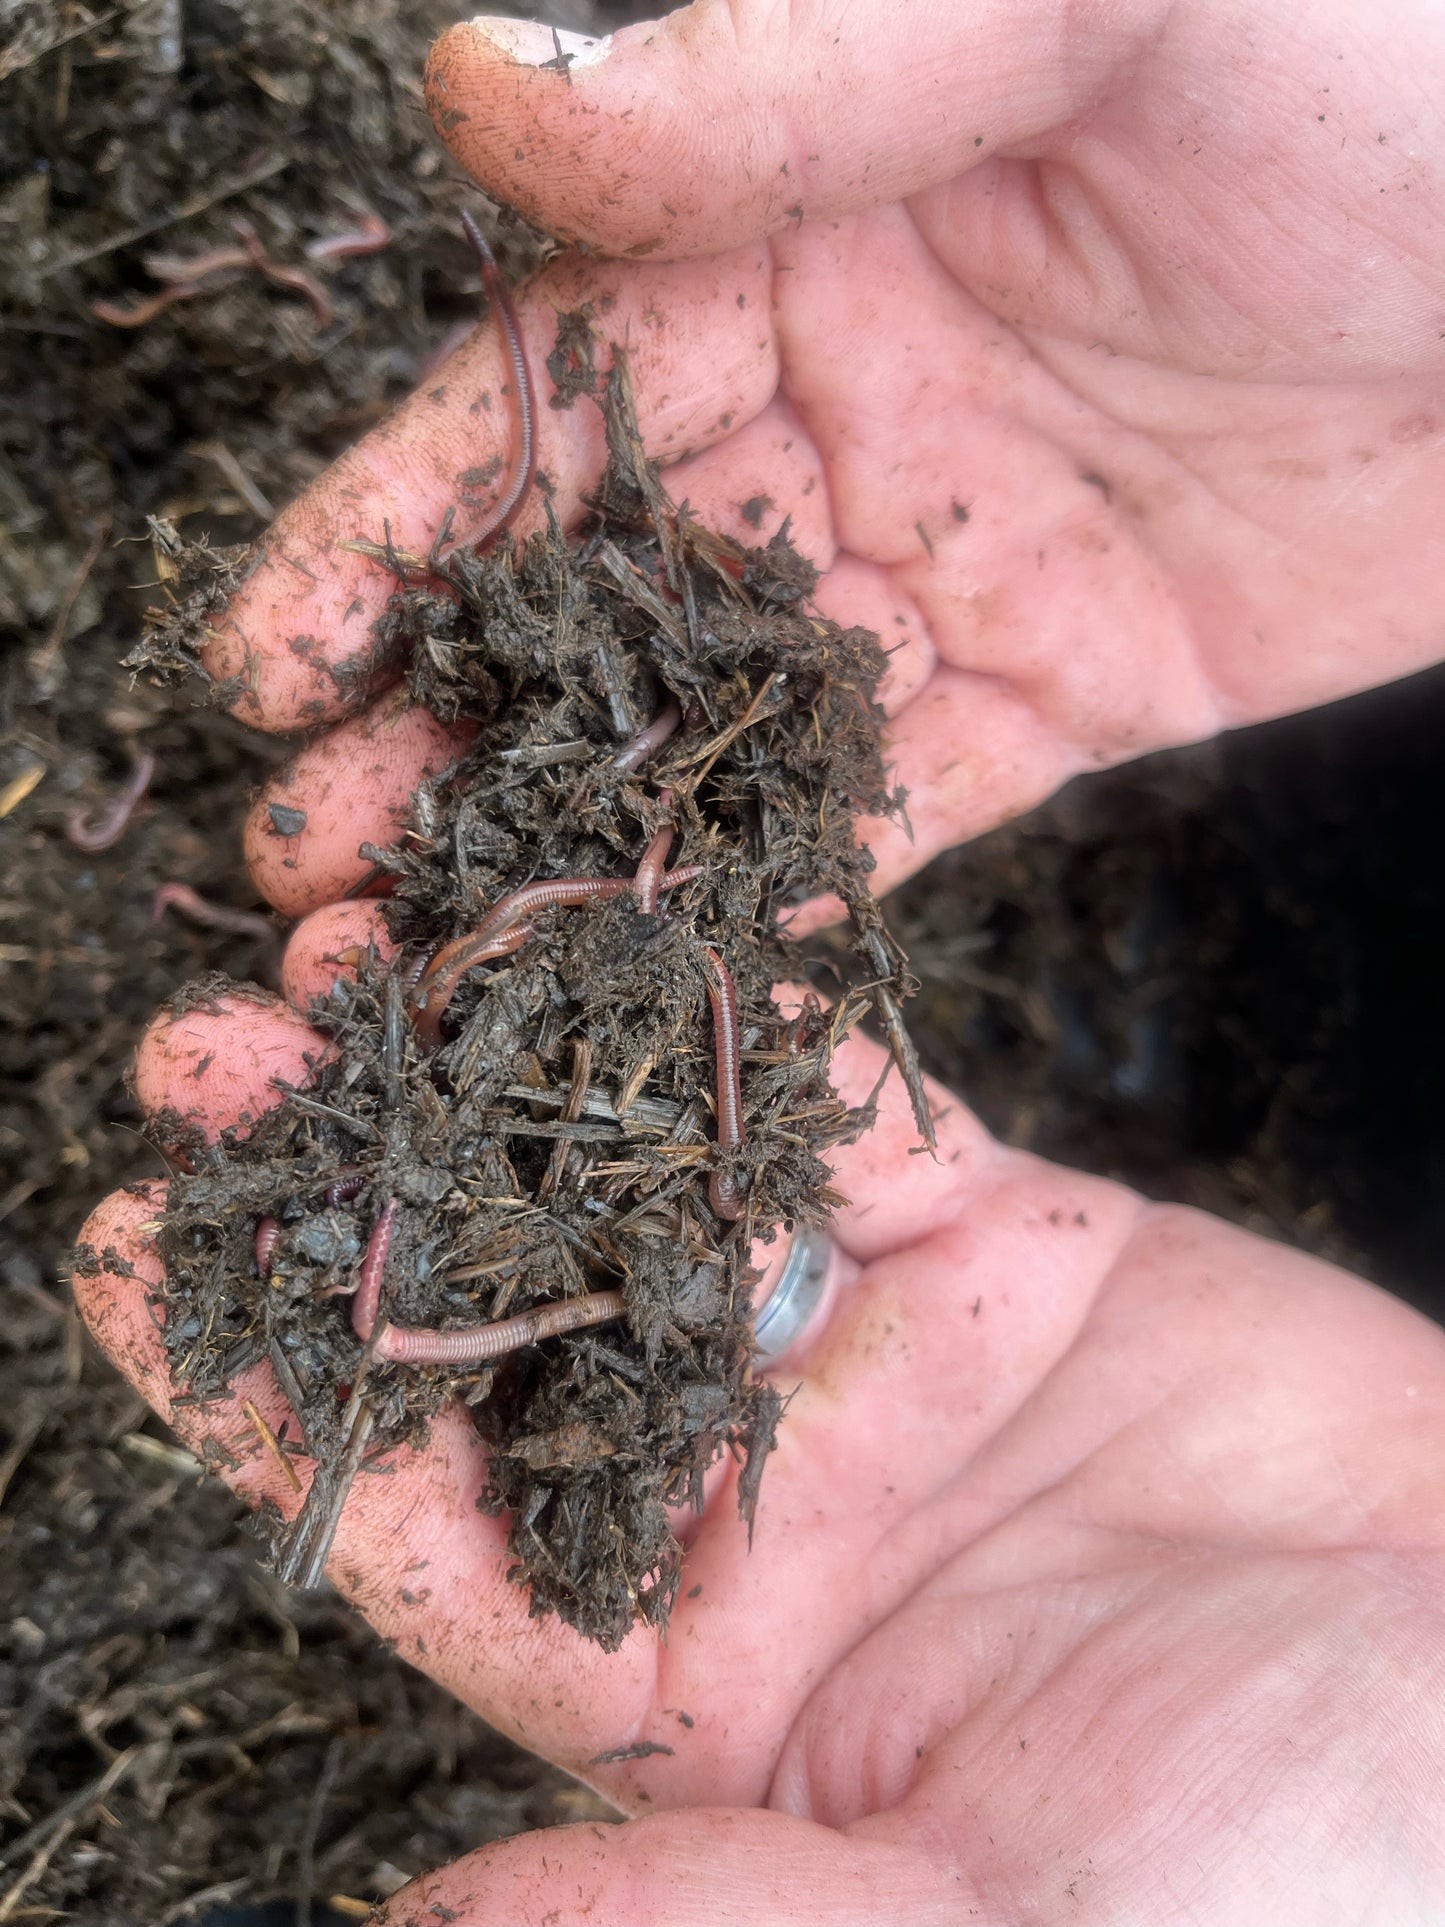 Worms and dirt in a person’s hands